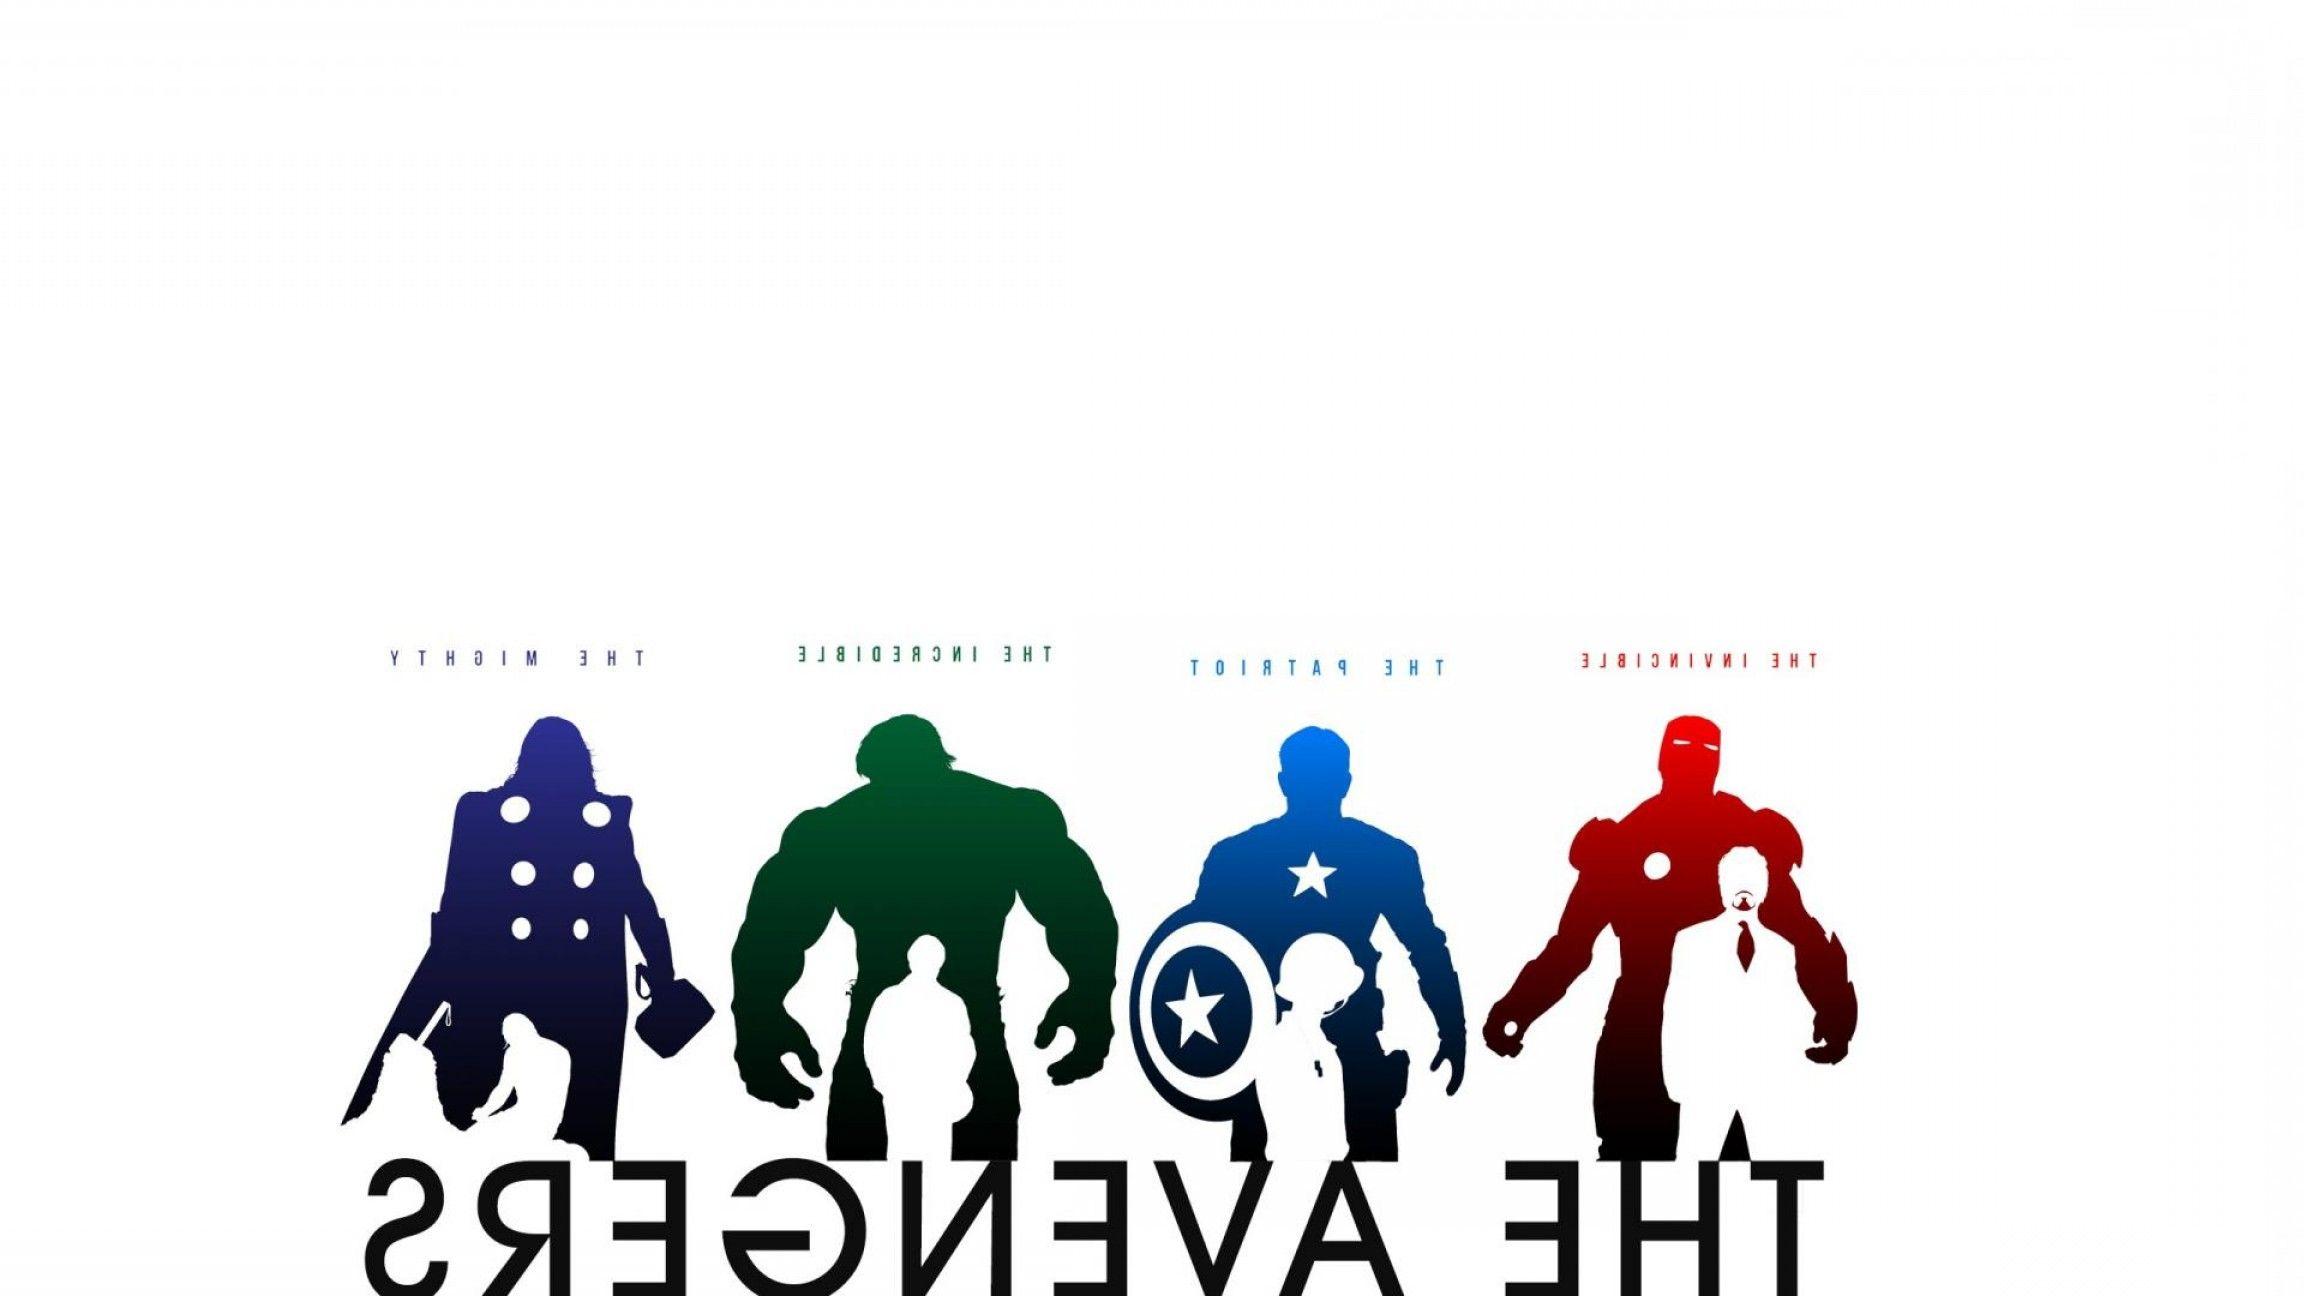 Avengers Silhouette Wallpapers Top Free Avengers Silhouette